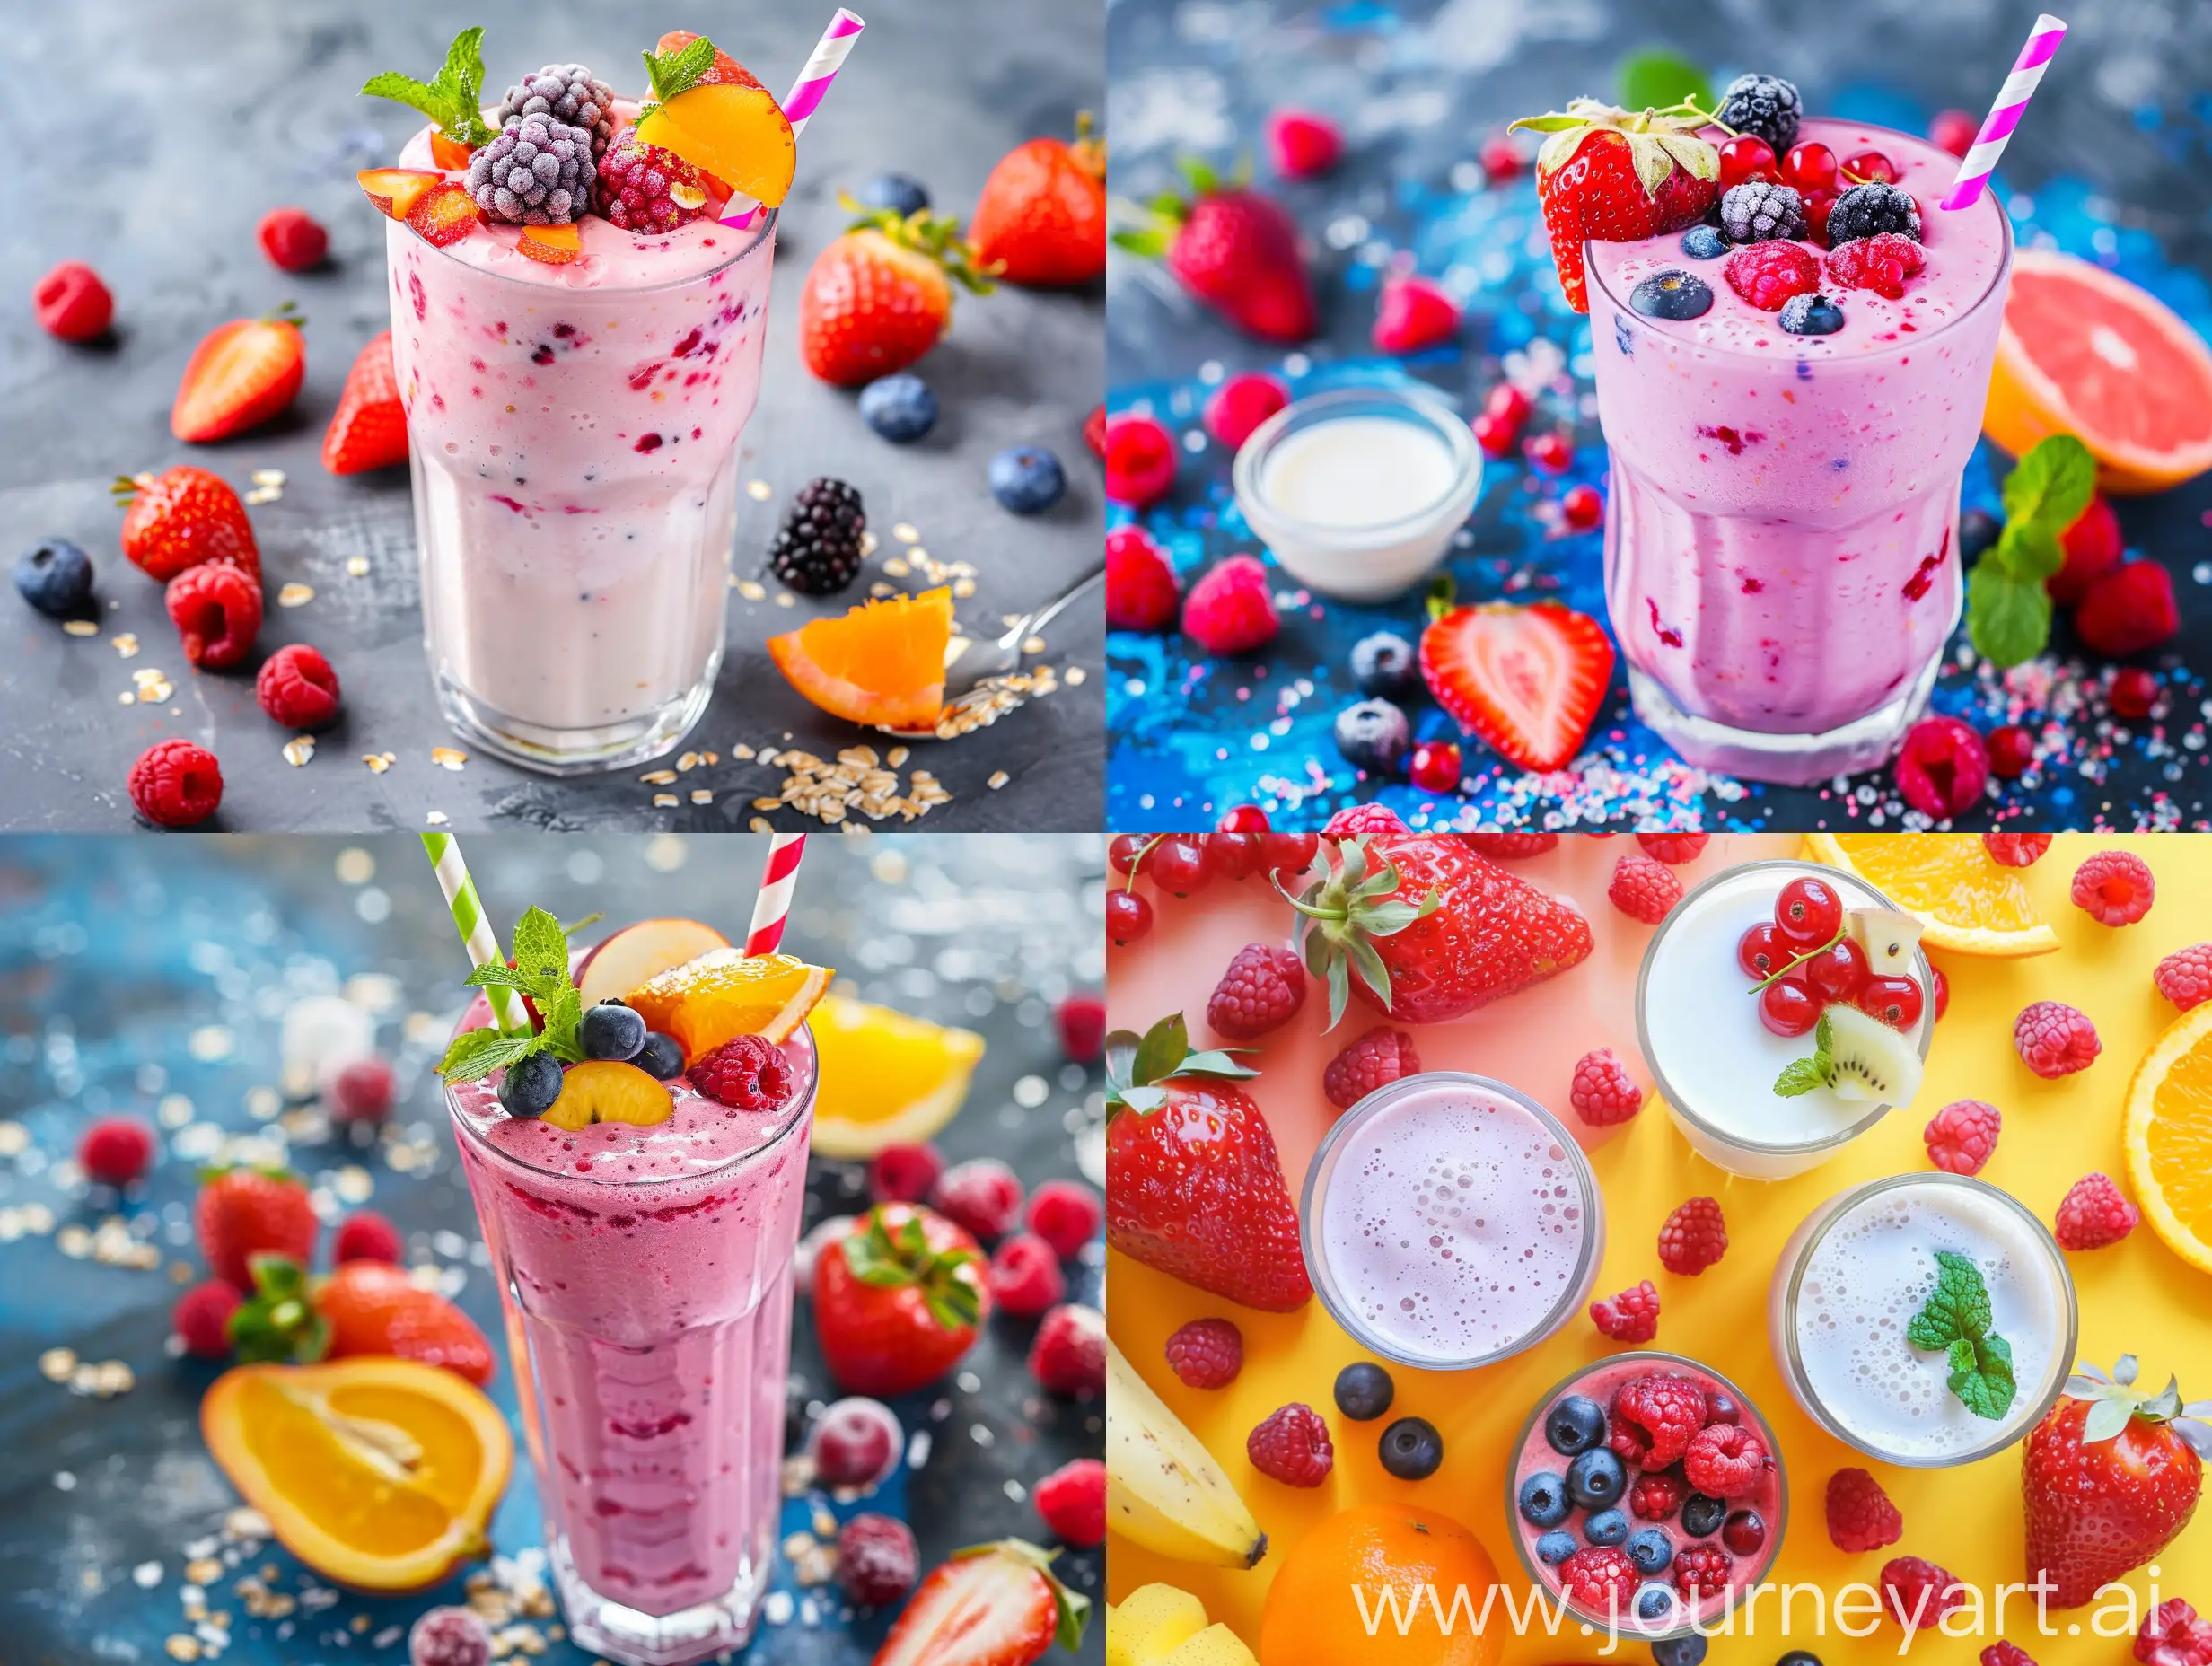 Colorful-Milkshake-with-Fresh-Fruits-and-Berries-on-Bright-Background